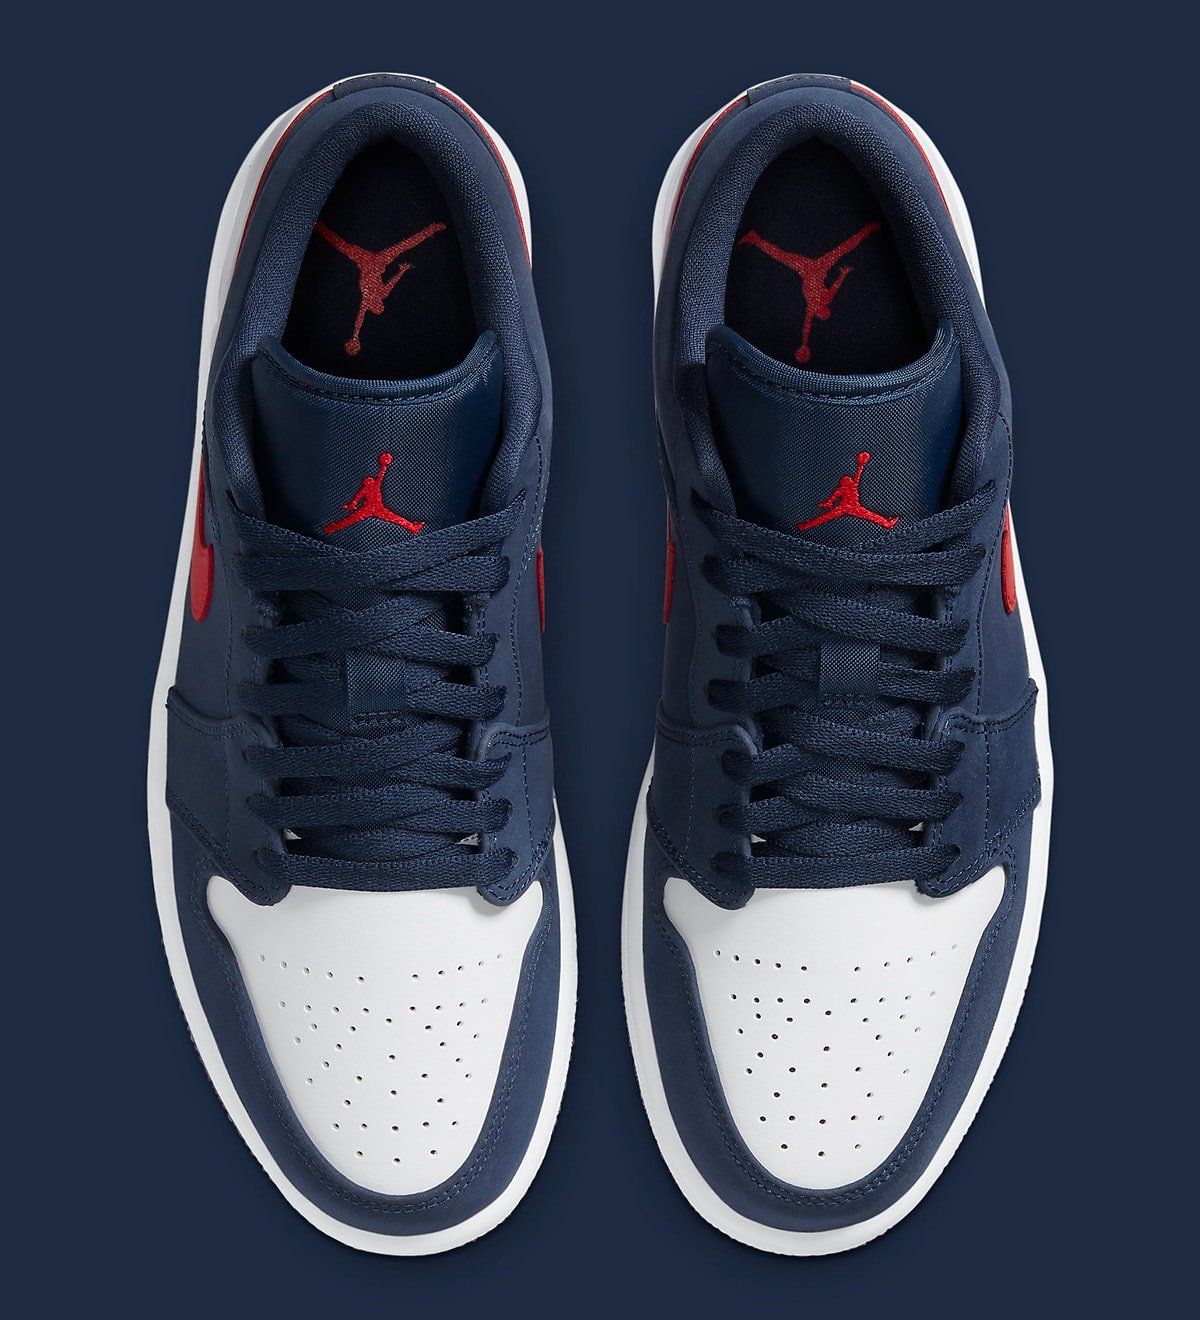 Available Now // Air Jordan 1 Low “USA” | HOUSE OF HEAT